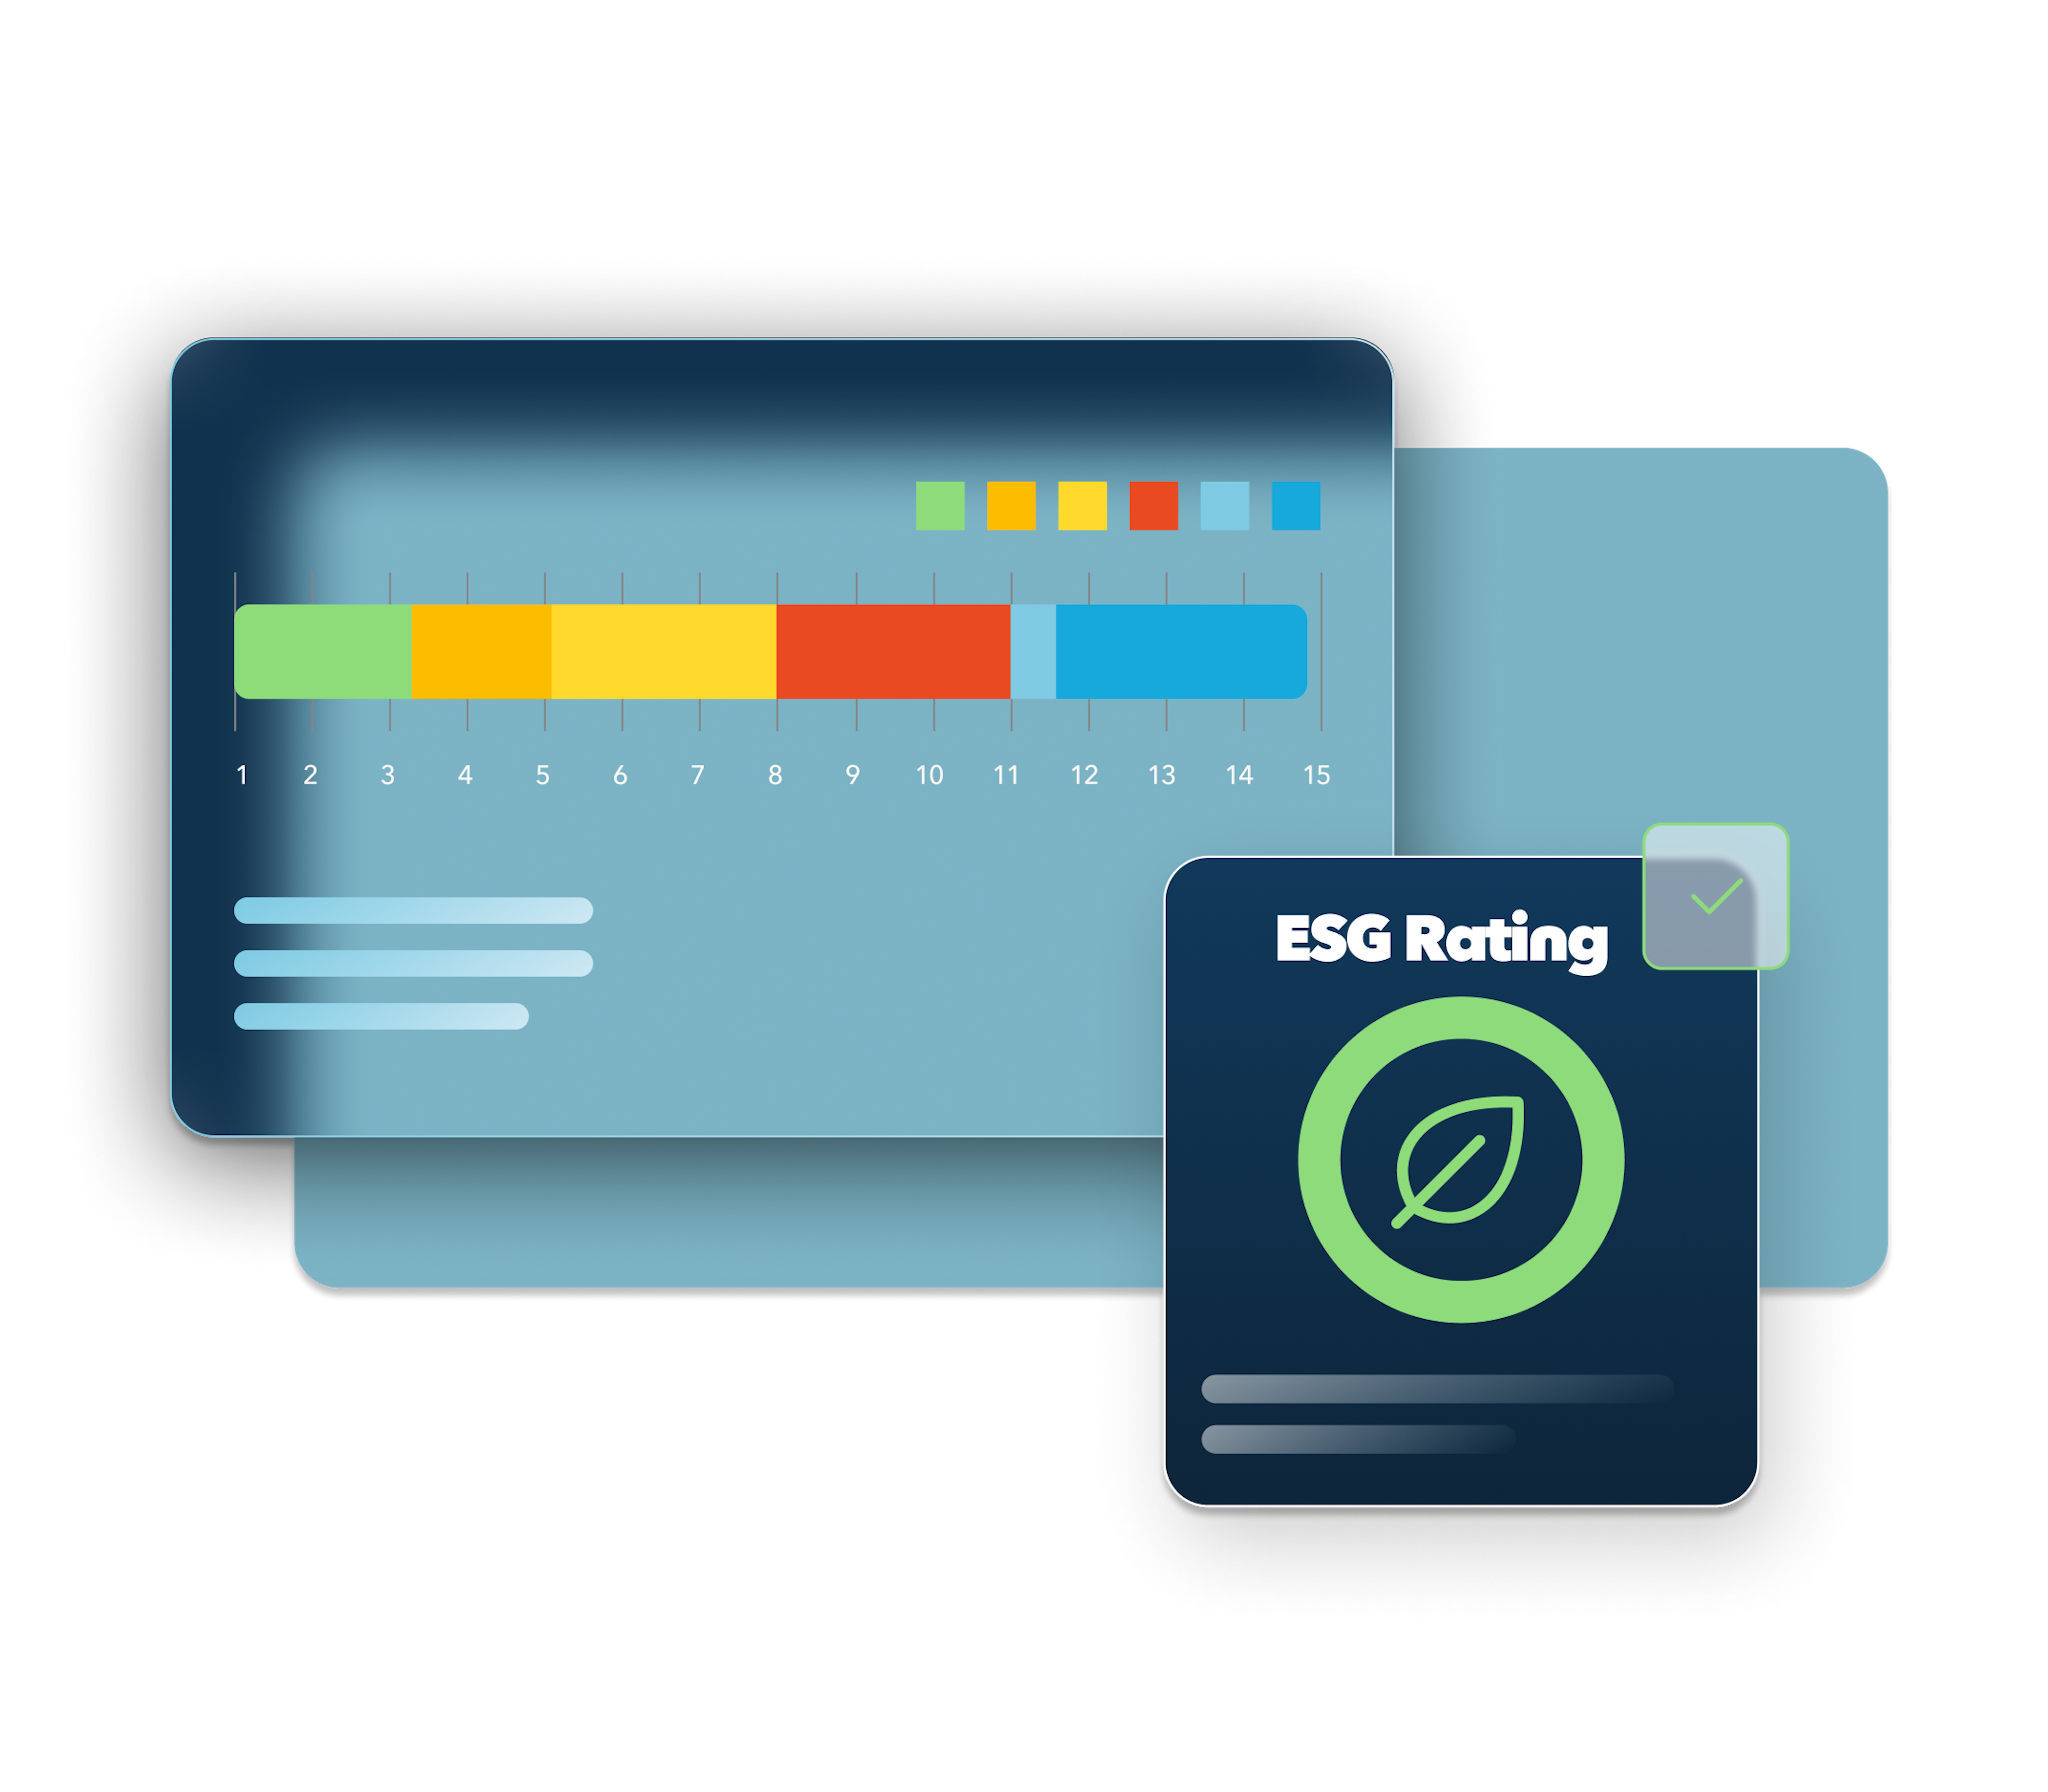 An abstracted software interface that represents corporate banking through ESG logos and status bars.